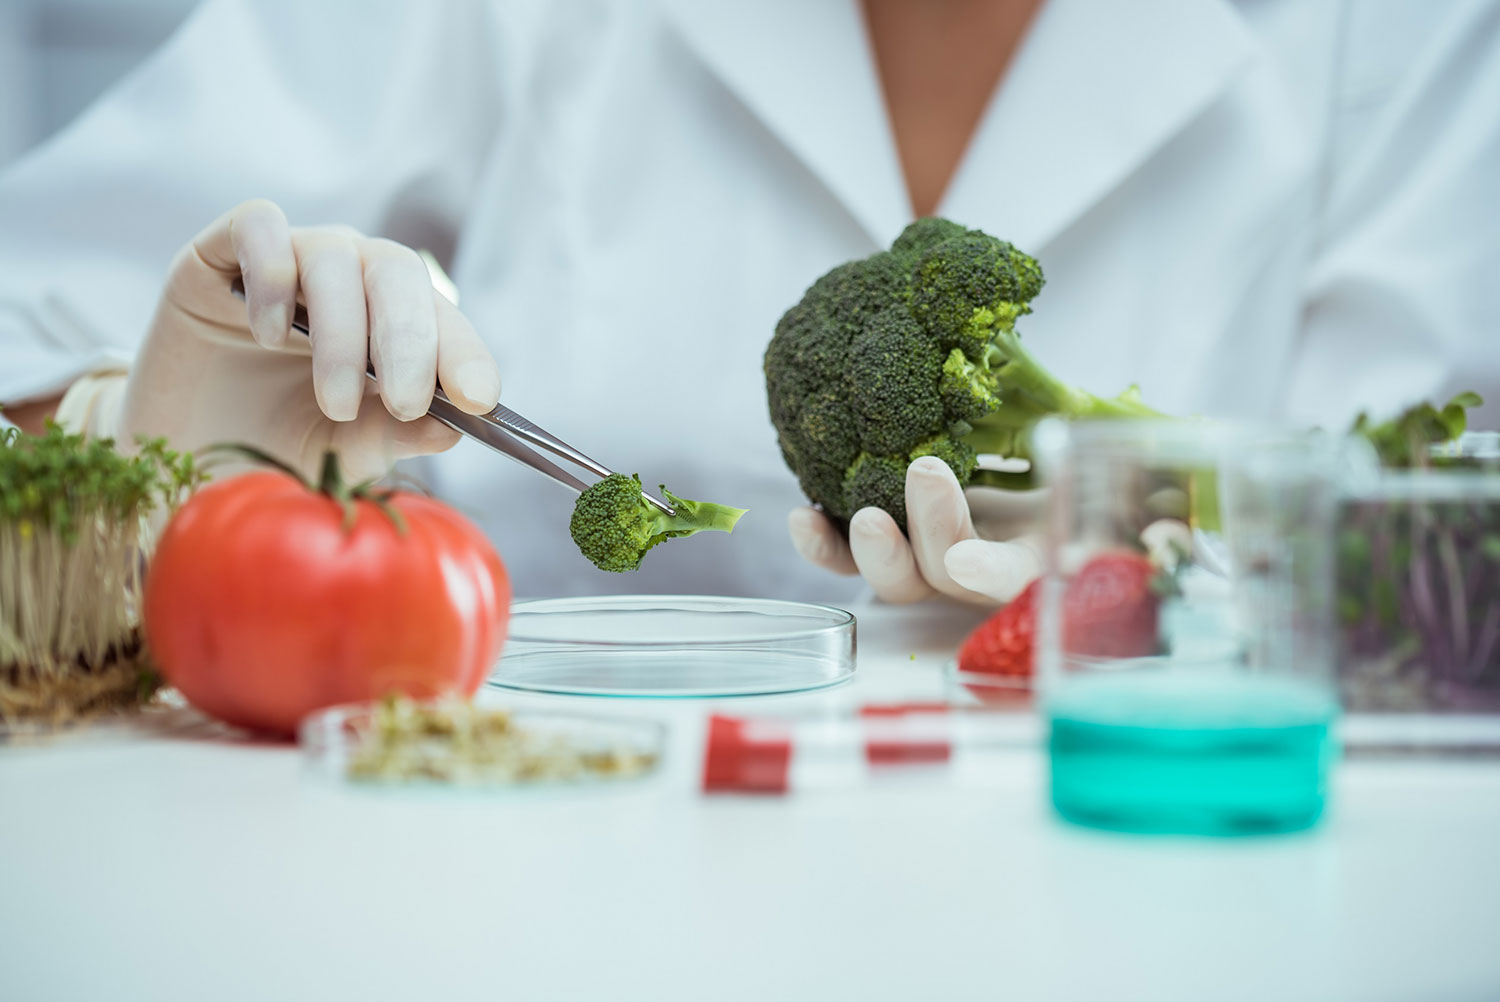 Achieving flavour and ingredient innovation through emerging technologies